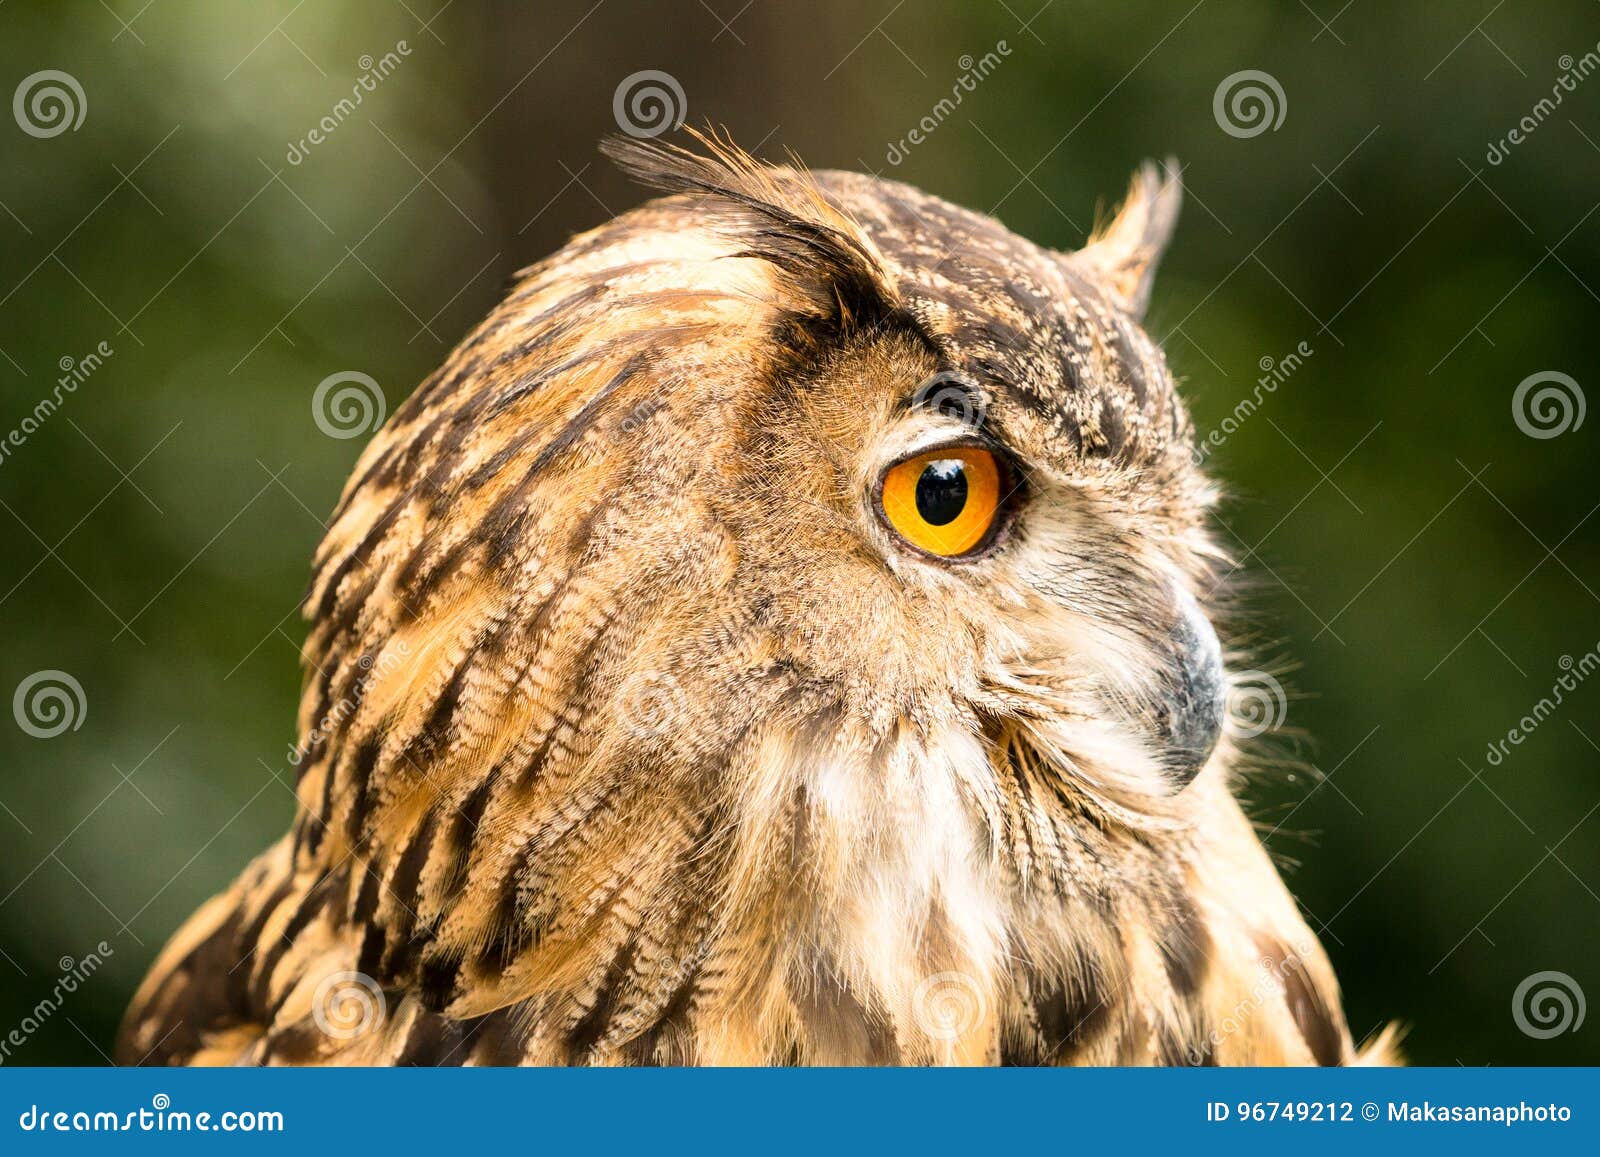 Owl Looking Sideways Photos - Free & Royalty-Free Stock Photos from ...